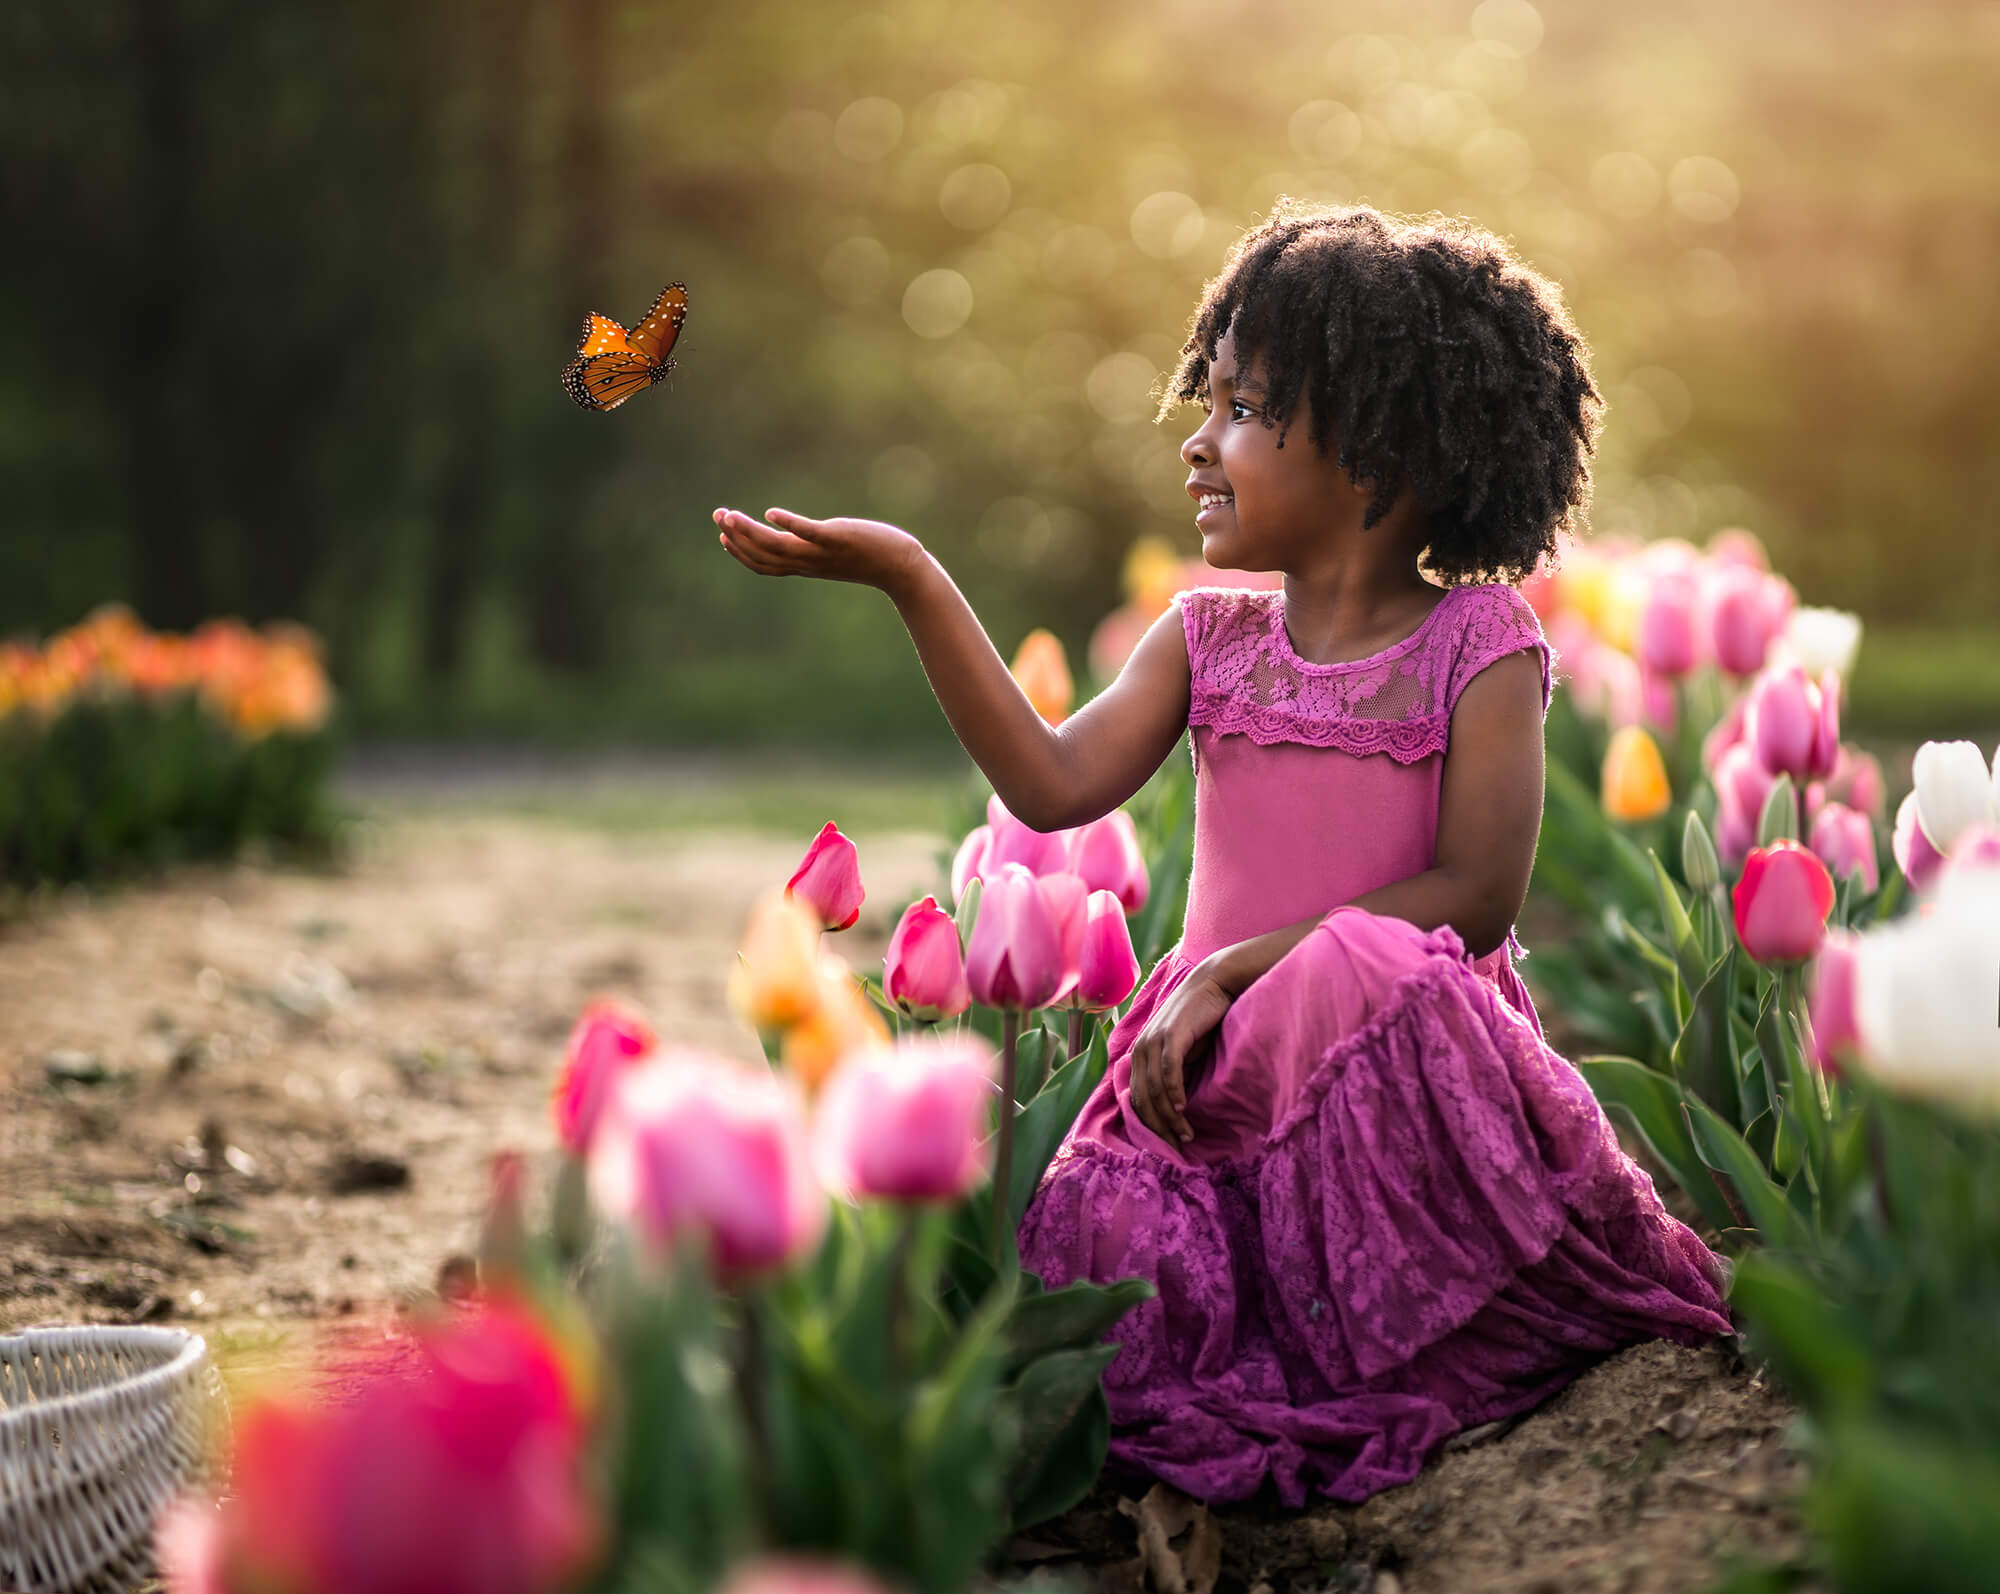 a little girl in a pink dress catching a butterfly surrounded by tulips.